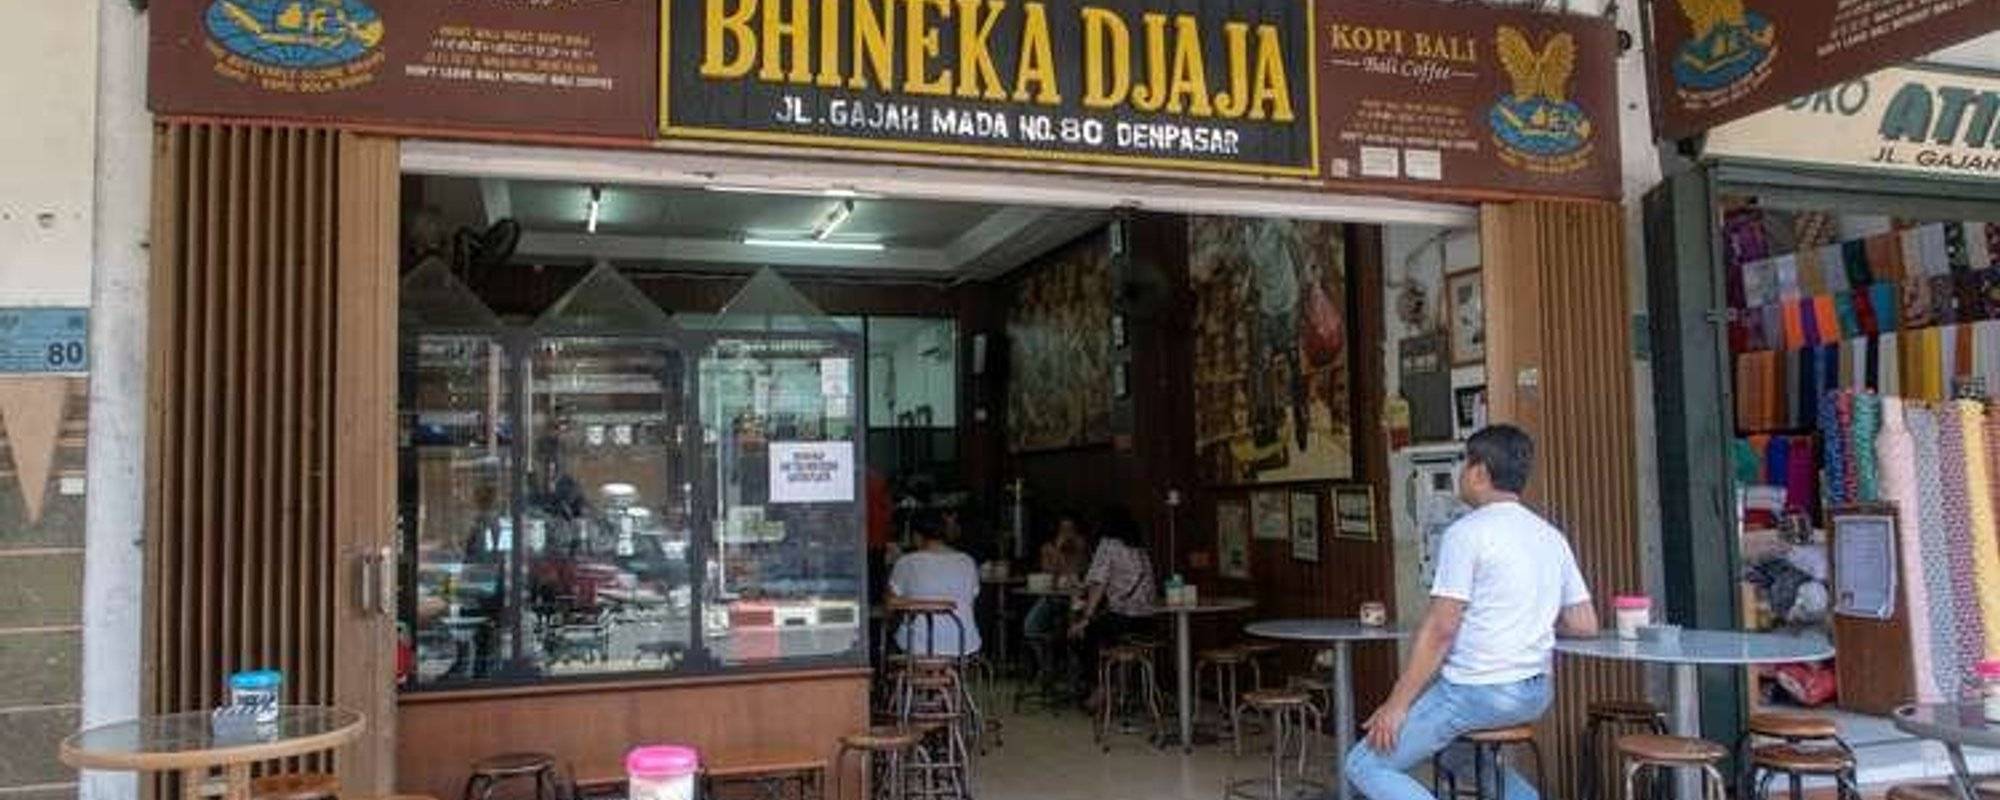 The Oldest Coffee Shop in the City of Denpasar